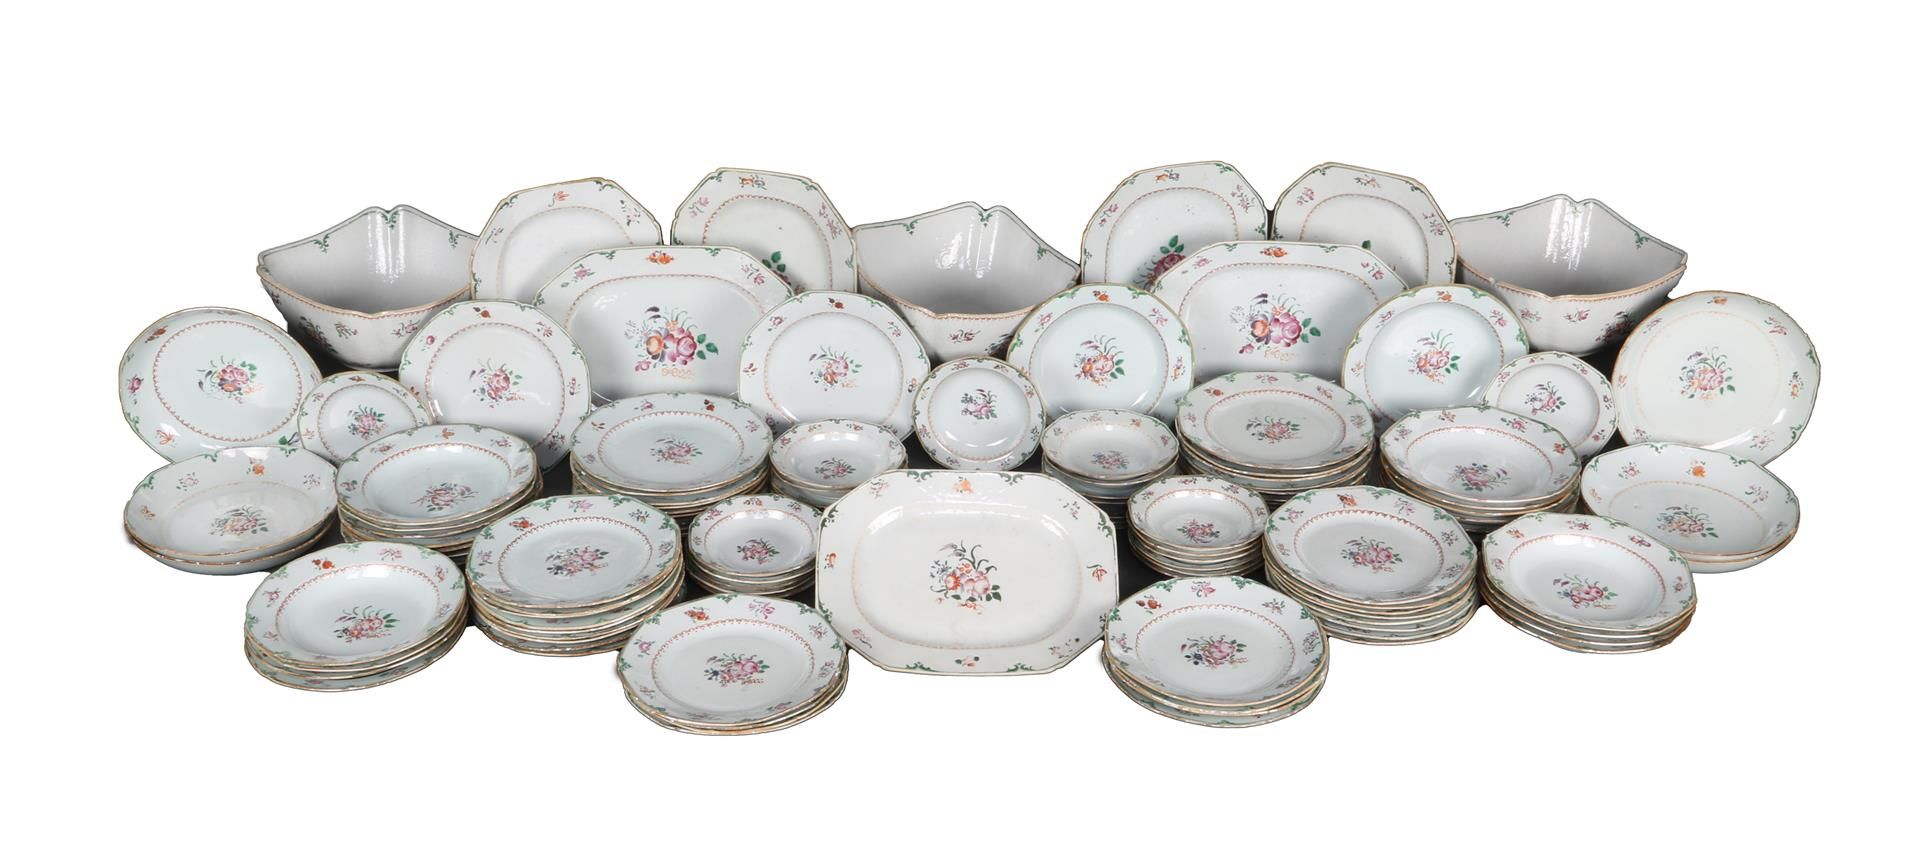 117-piece Chinese porcelain dinner set Famille Rose, Qianlong period